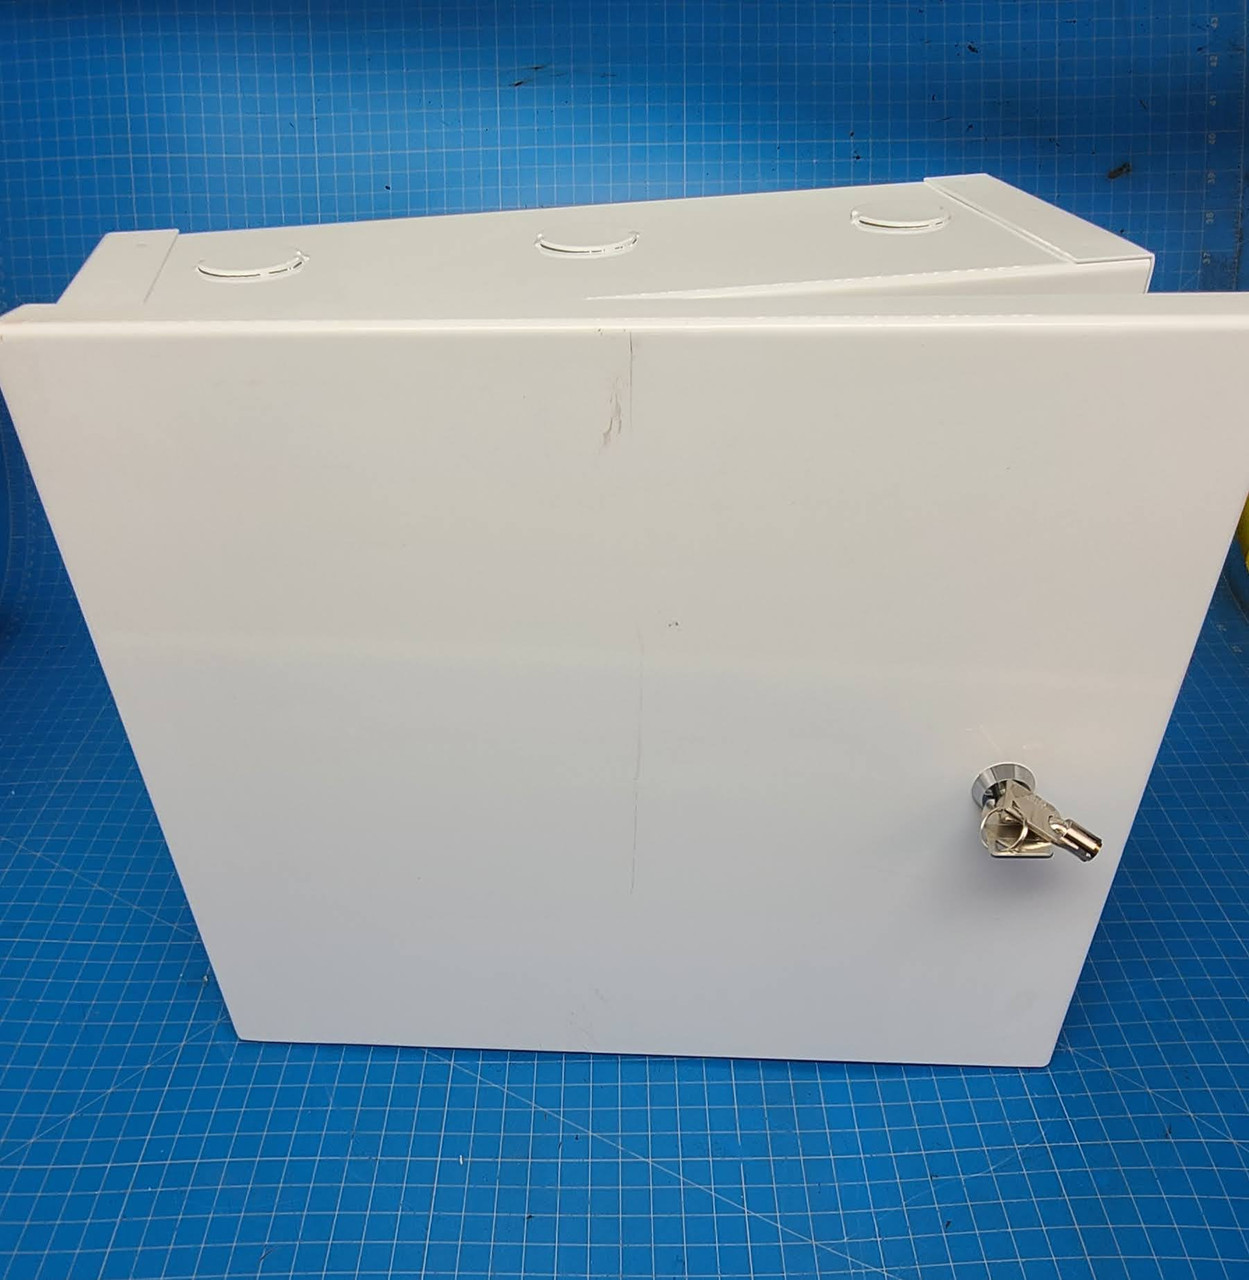 Multi-Purpose Industrial Lockable Cabinet 30 x 20 x 8 White Steel Surface Mounted NO KOs CAB236